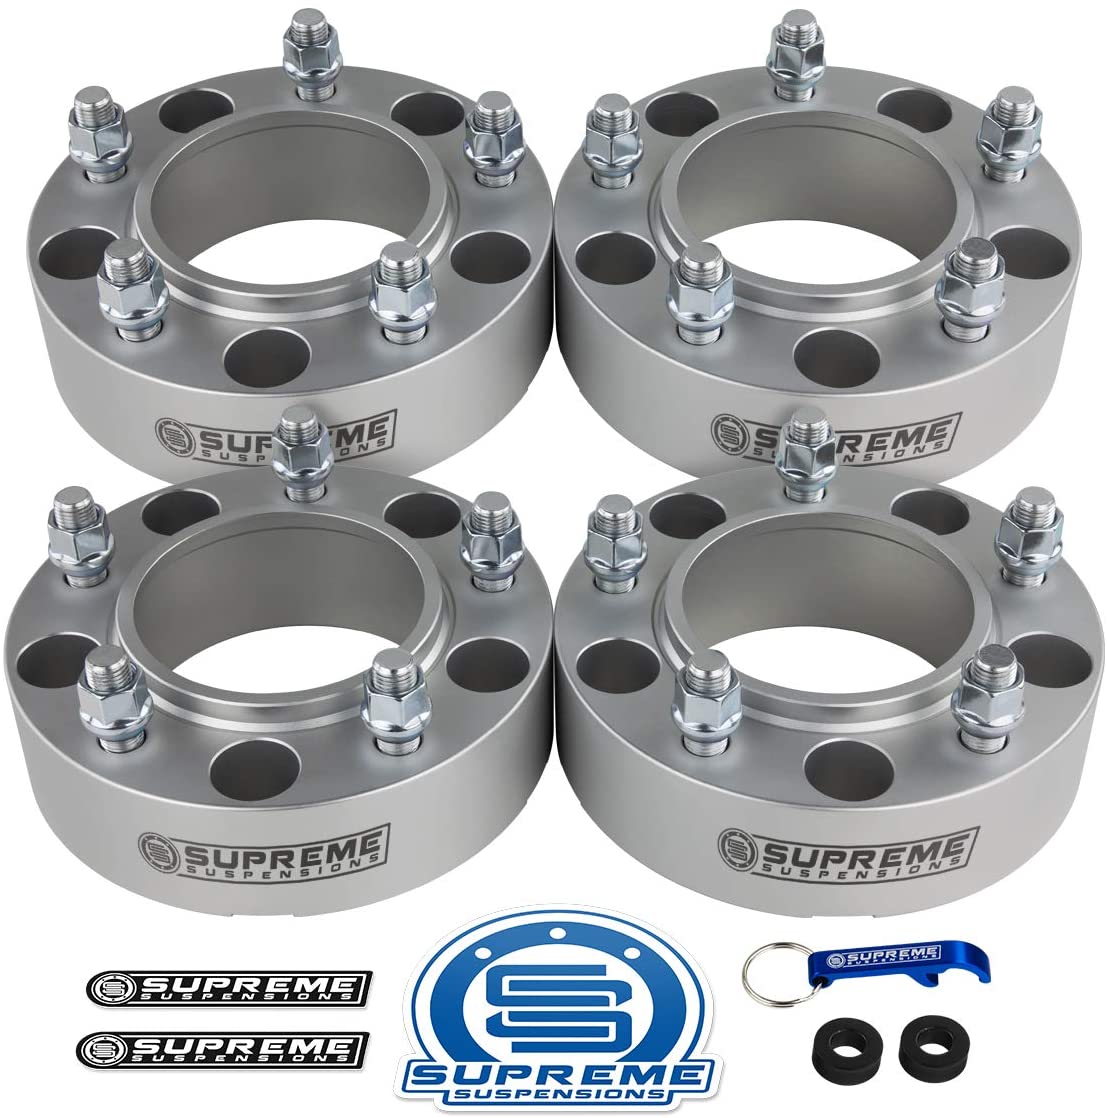 Buy Supreme Suspensions - 4pc 2 Hub Centric Wheel Spacers for 2004-2014  Ford F150 2WD 4WD 6x135mm BP with M14x2 Studs 87mm Center Bore w/Lip  [Black] Online in Indonesia. B01E0HFK9Y